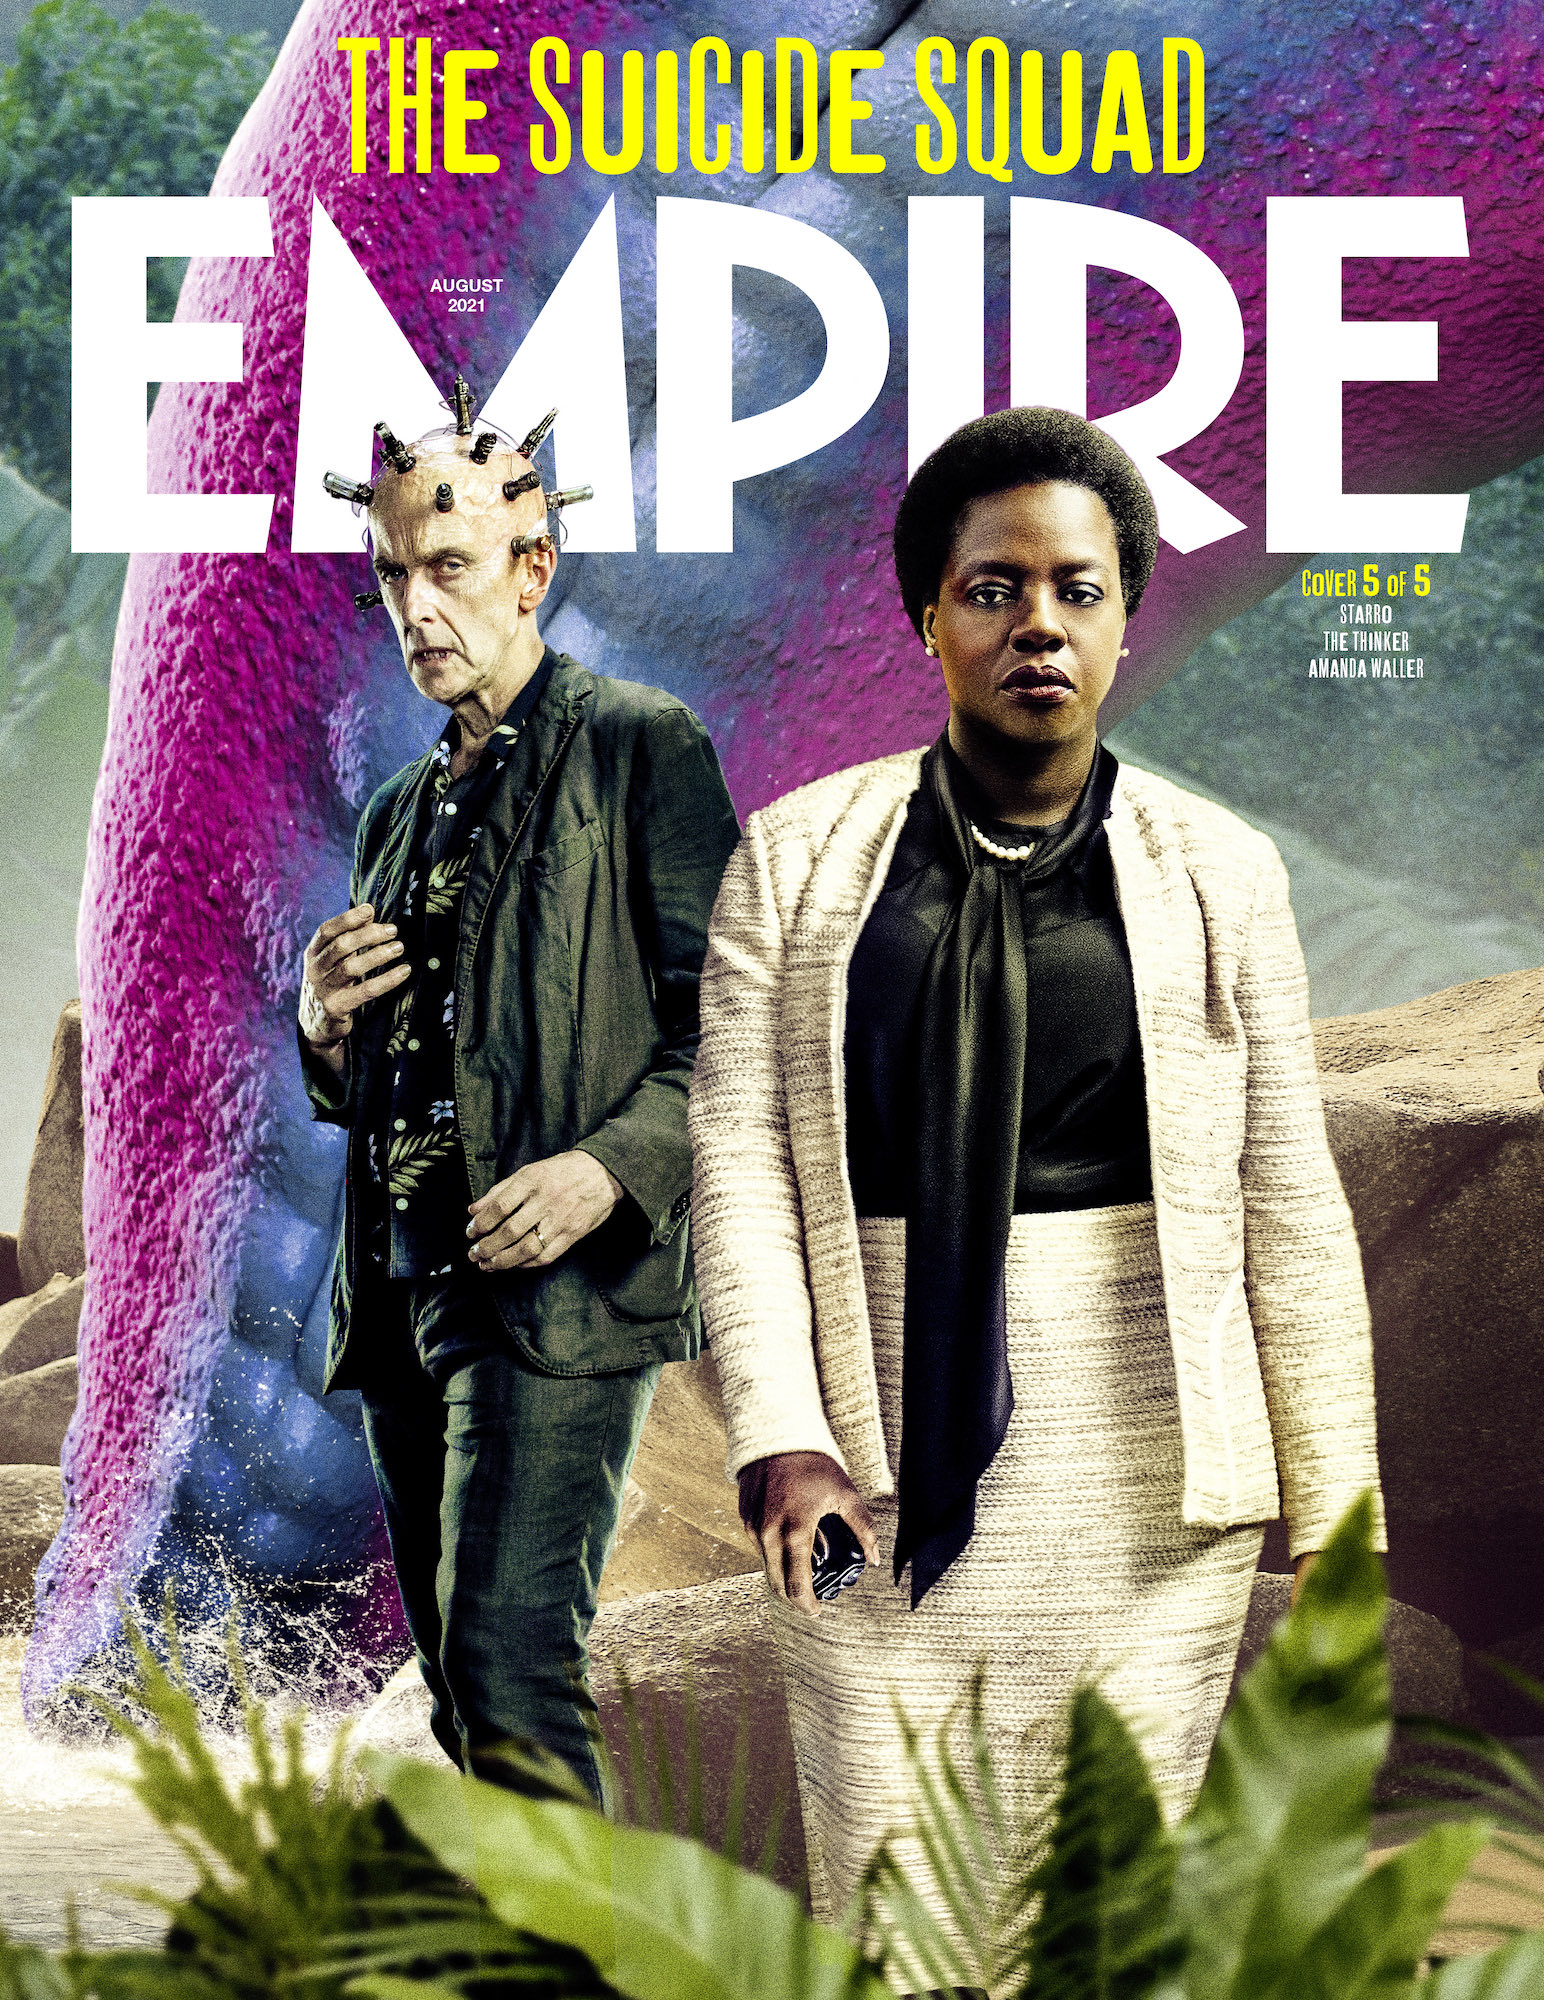 Doctor Who's Peter Capaldi Gets Empire Magazine Covers as The Thinker